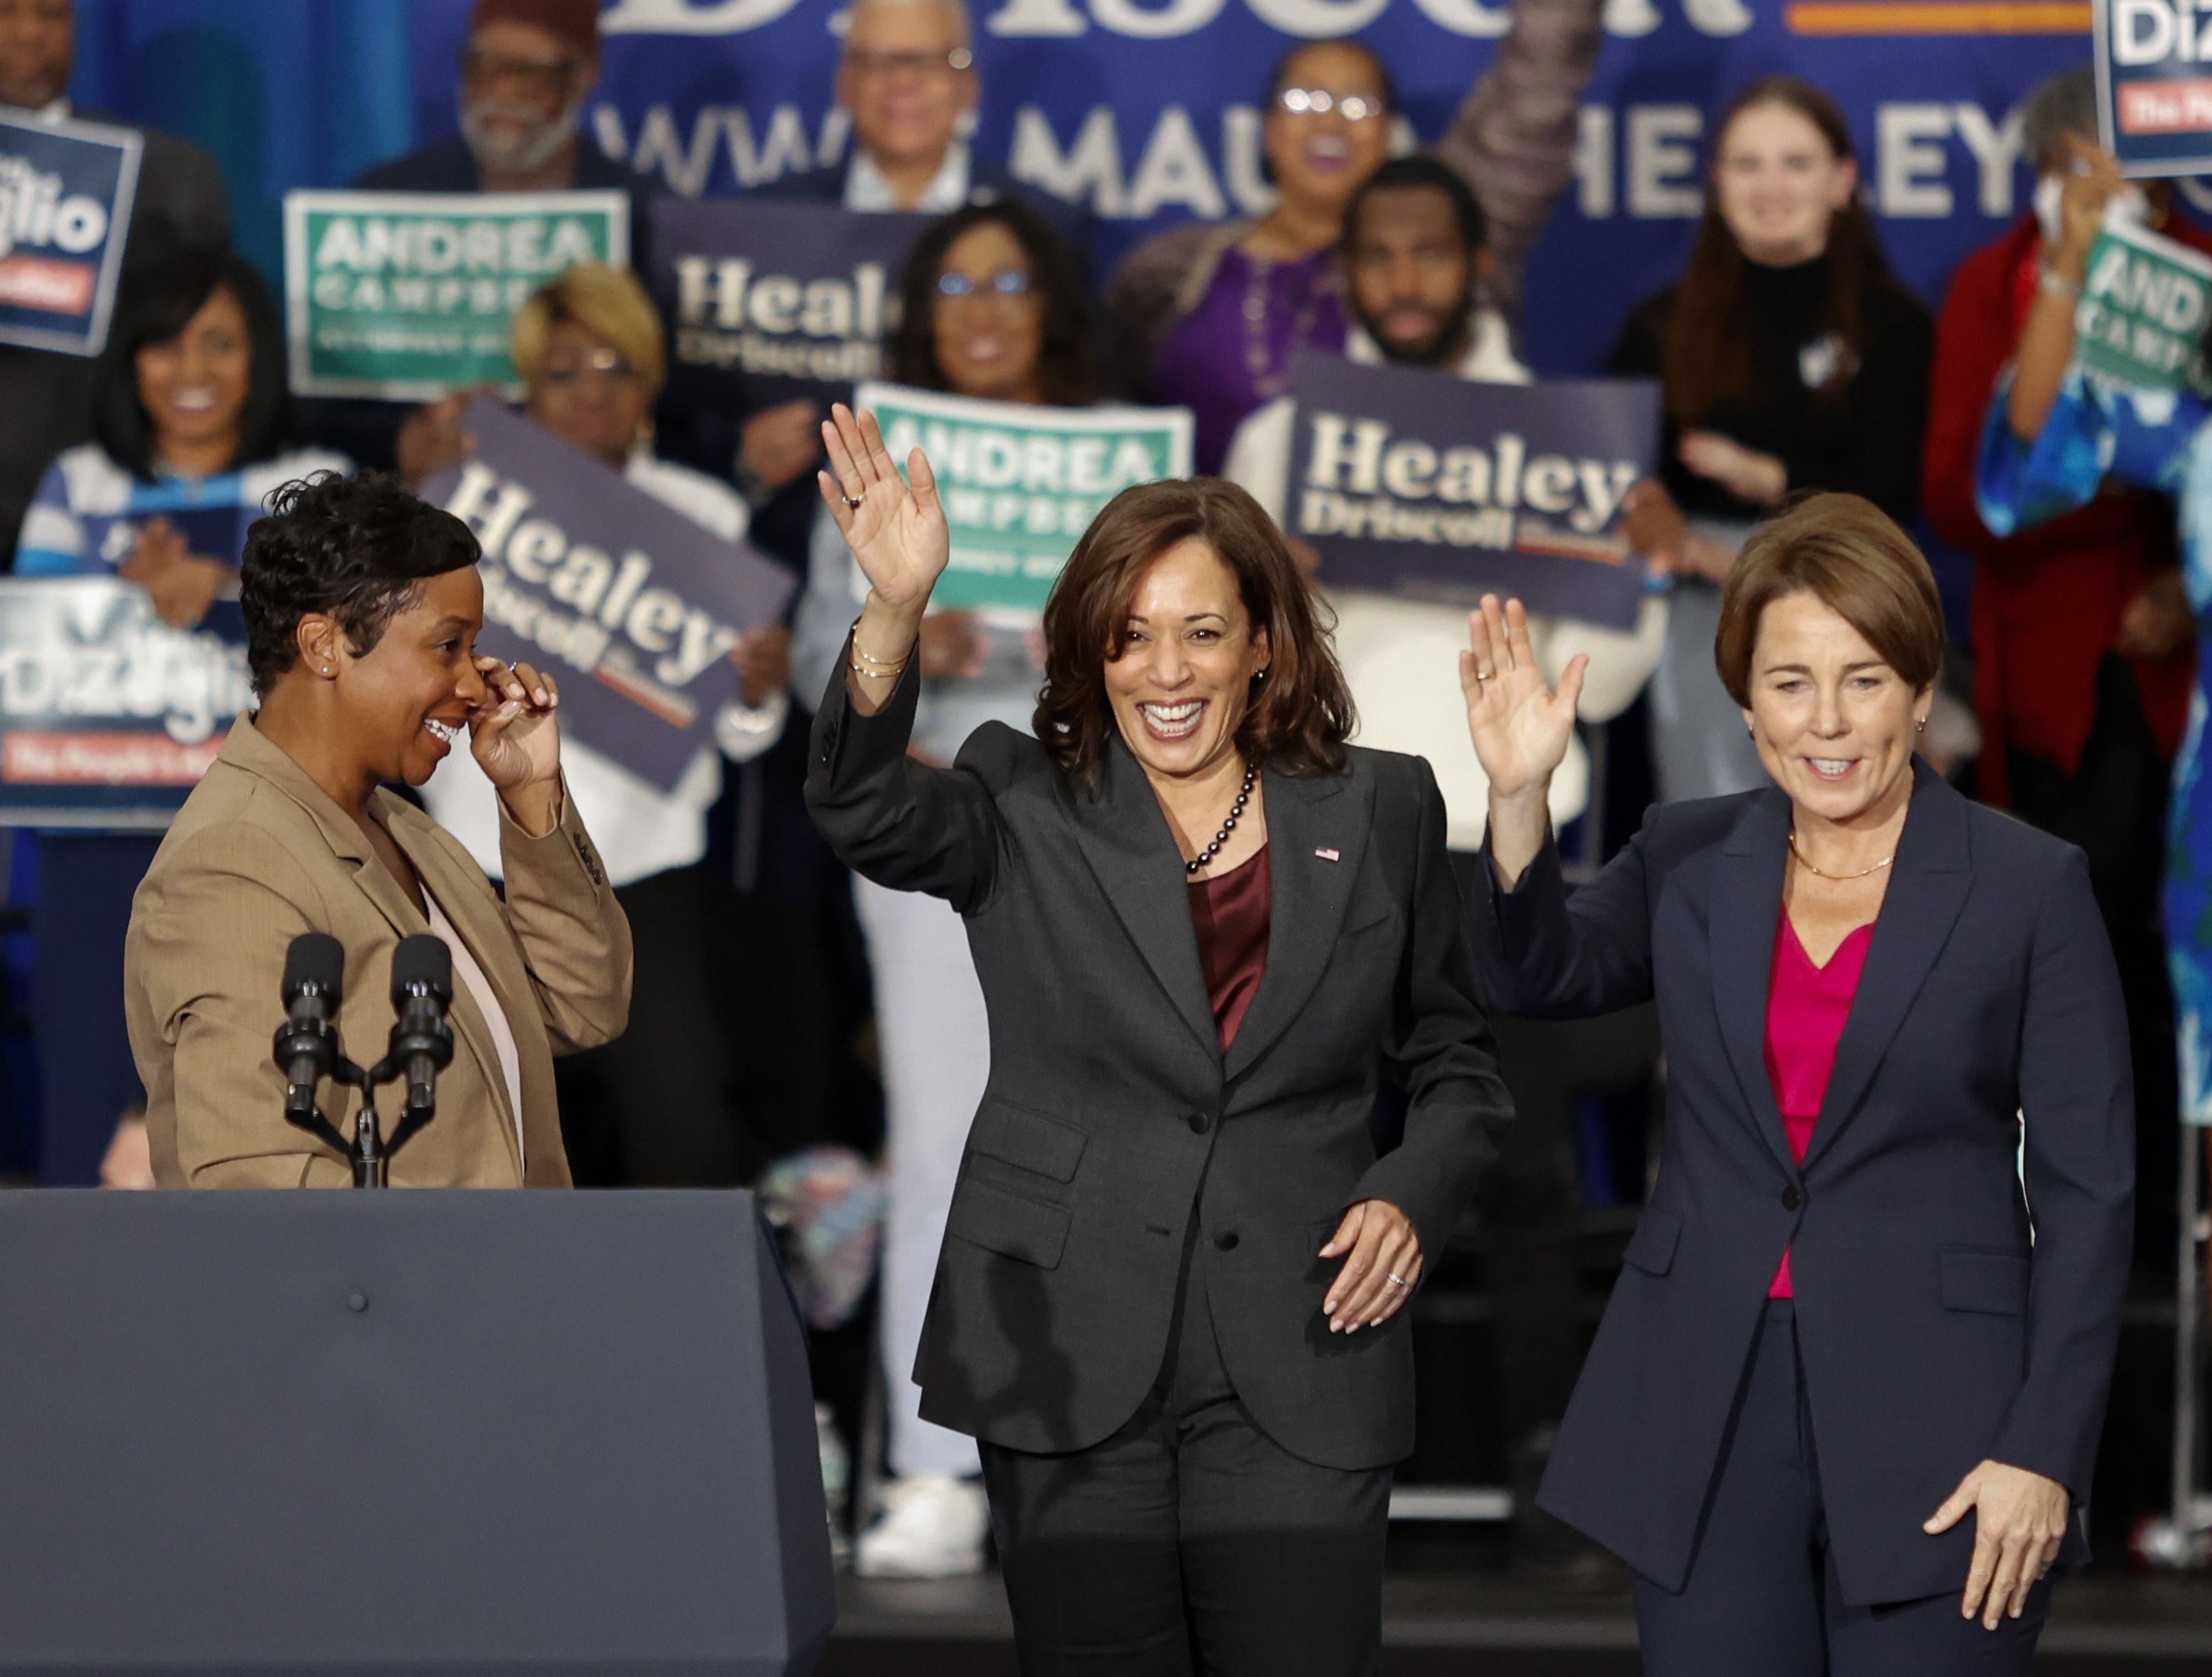 Vice President Kamala Harris, center, is joined on the stage by Attorney General nominee Andrea Campbell, left, and Massachusetts Attorney General and Democratic candidate for Gov. Maura Healey during a campaign rally in support of the statewide Massachusetts Democratic ticket, Wednesday, Nov. 2, 2022, in Boston. (AP Photo/Mary Schwalm)